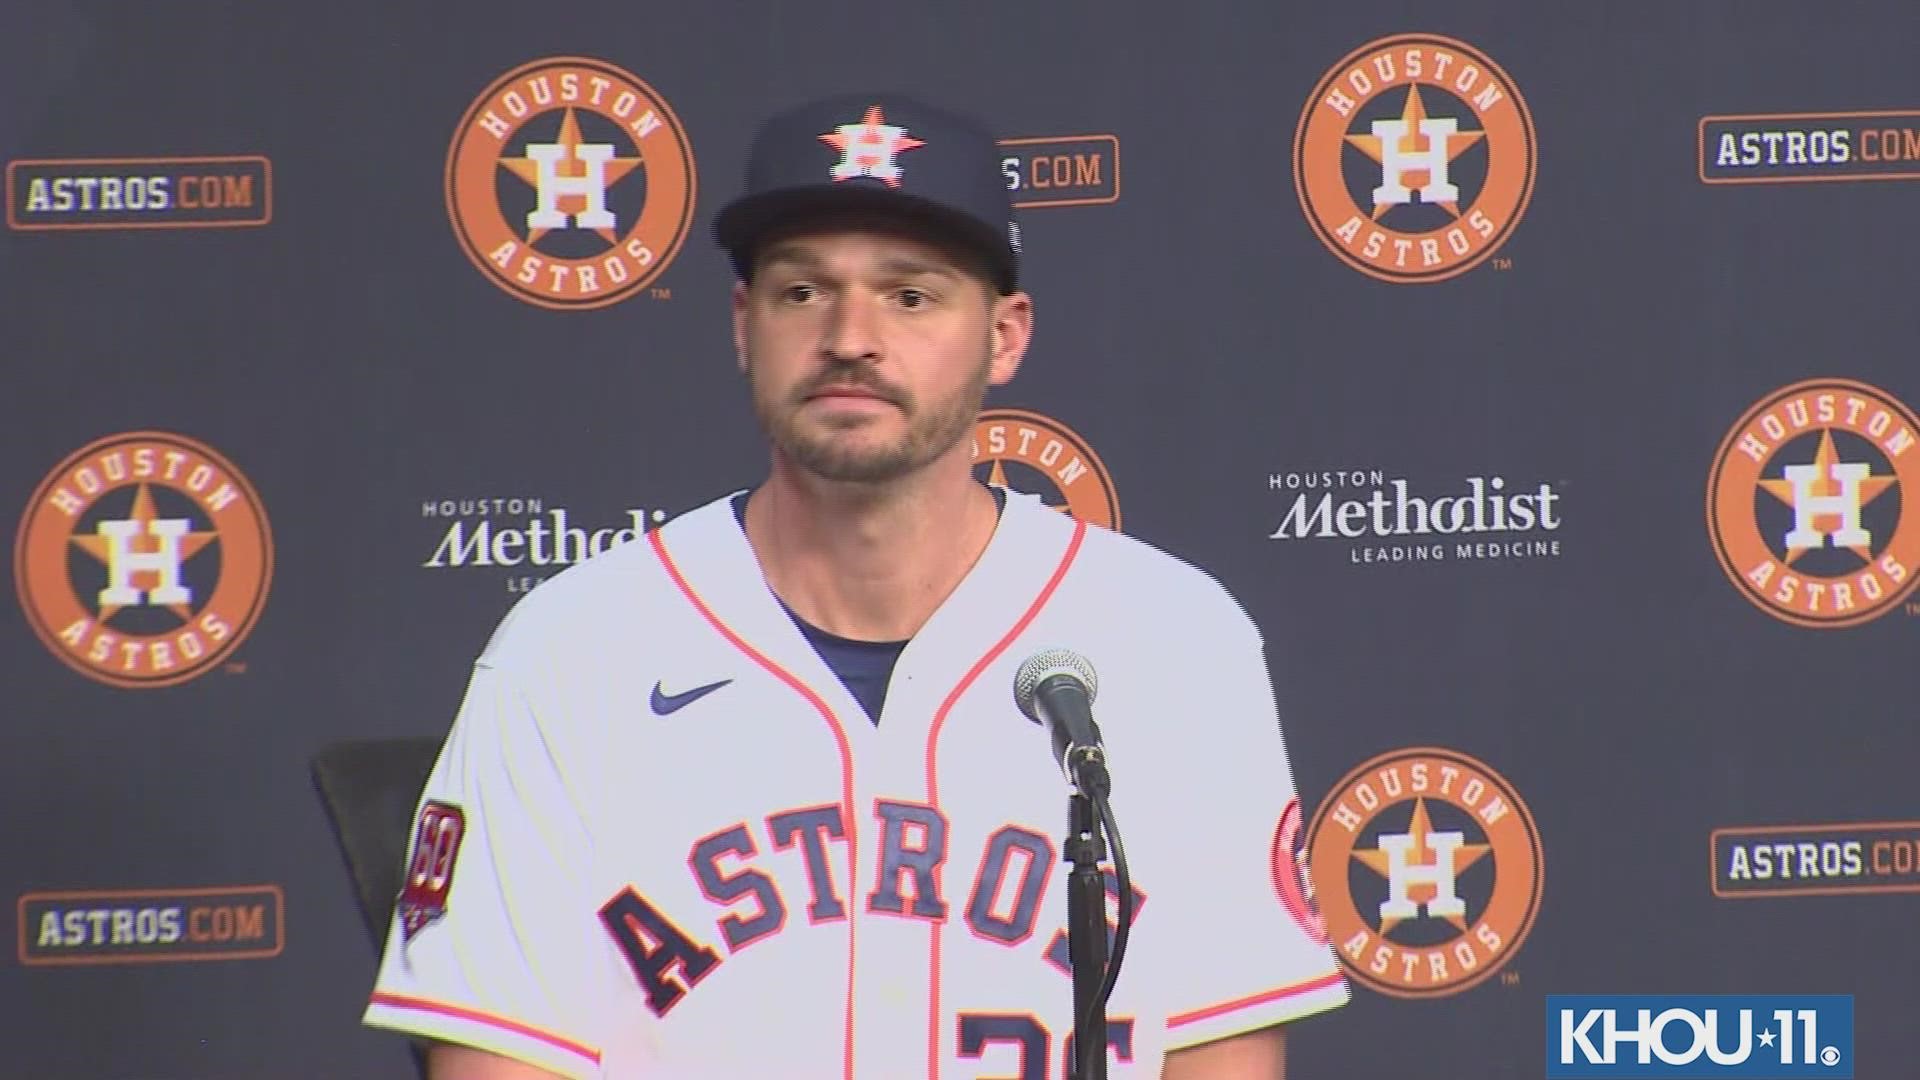 The Astros landed Mancini in a trade with the Orioles on Monday, Aug. 1, 2022. This video is from his introductory news conference in Houston a day later.